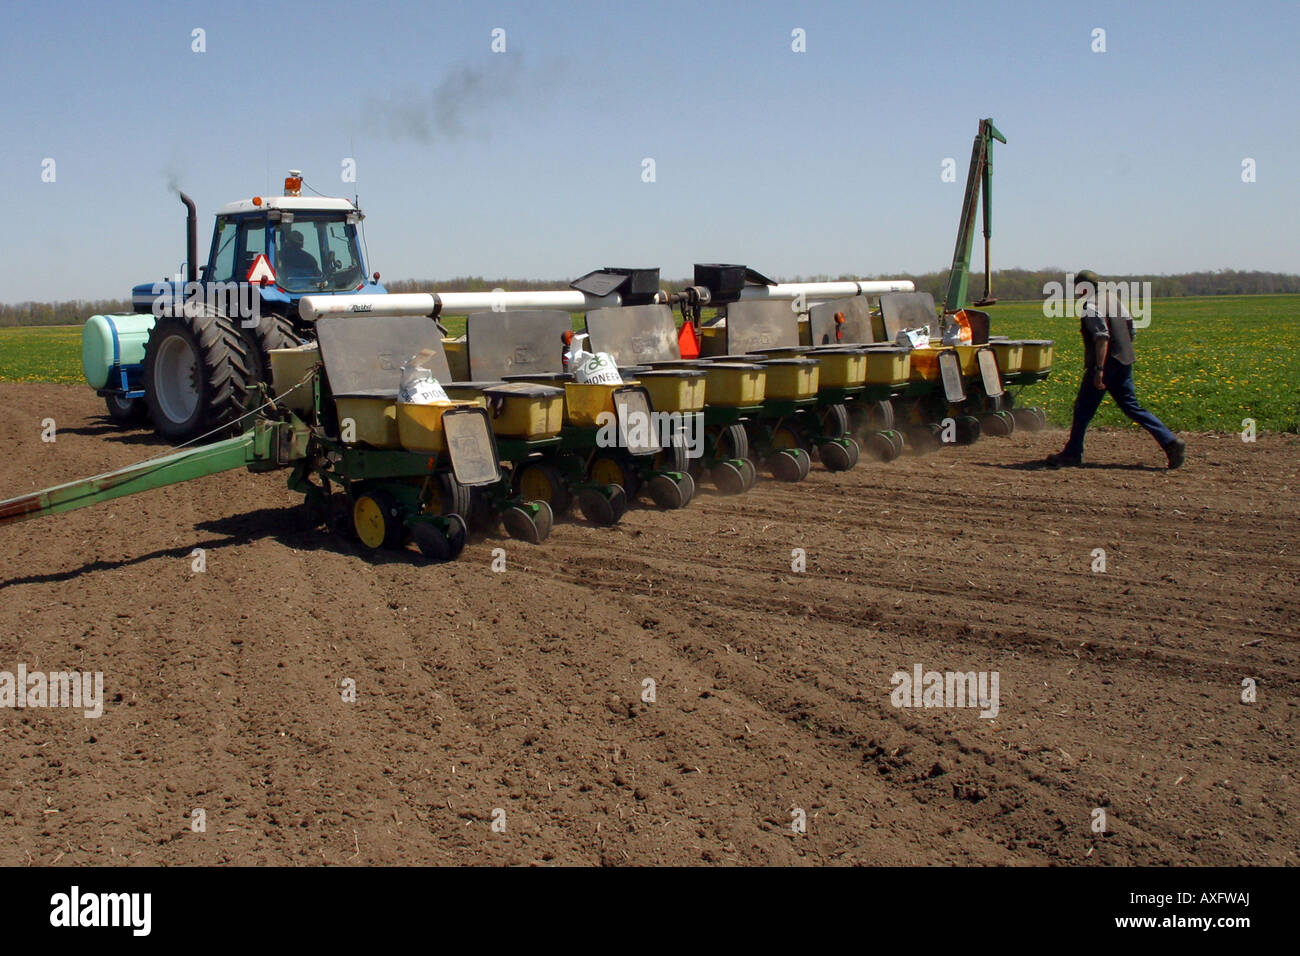 A farm worker walks being a tractor and planter ensuring the seed bins are working correctly and seeds are being planted. Stock Photo